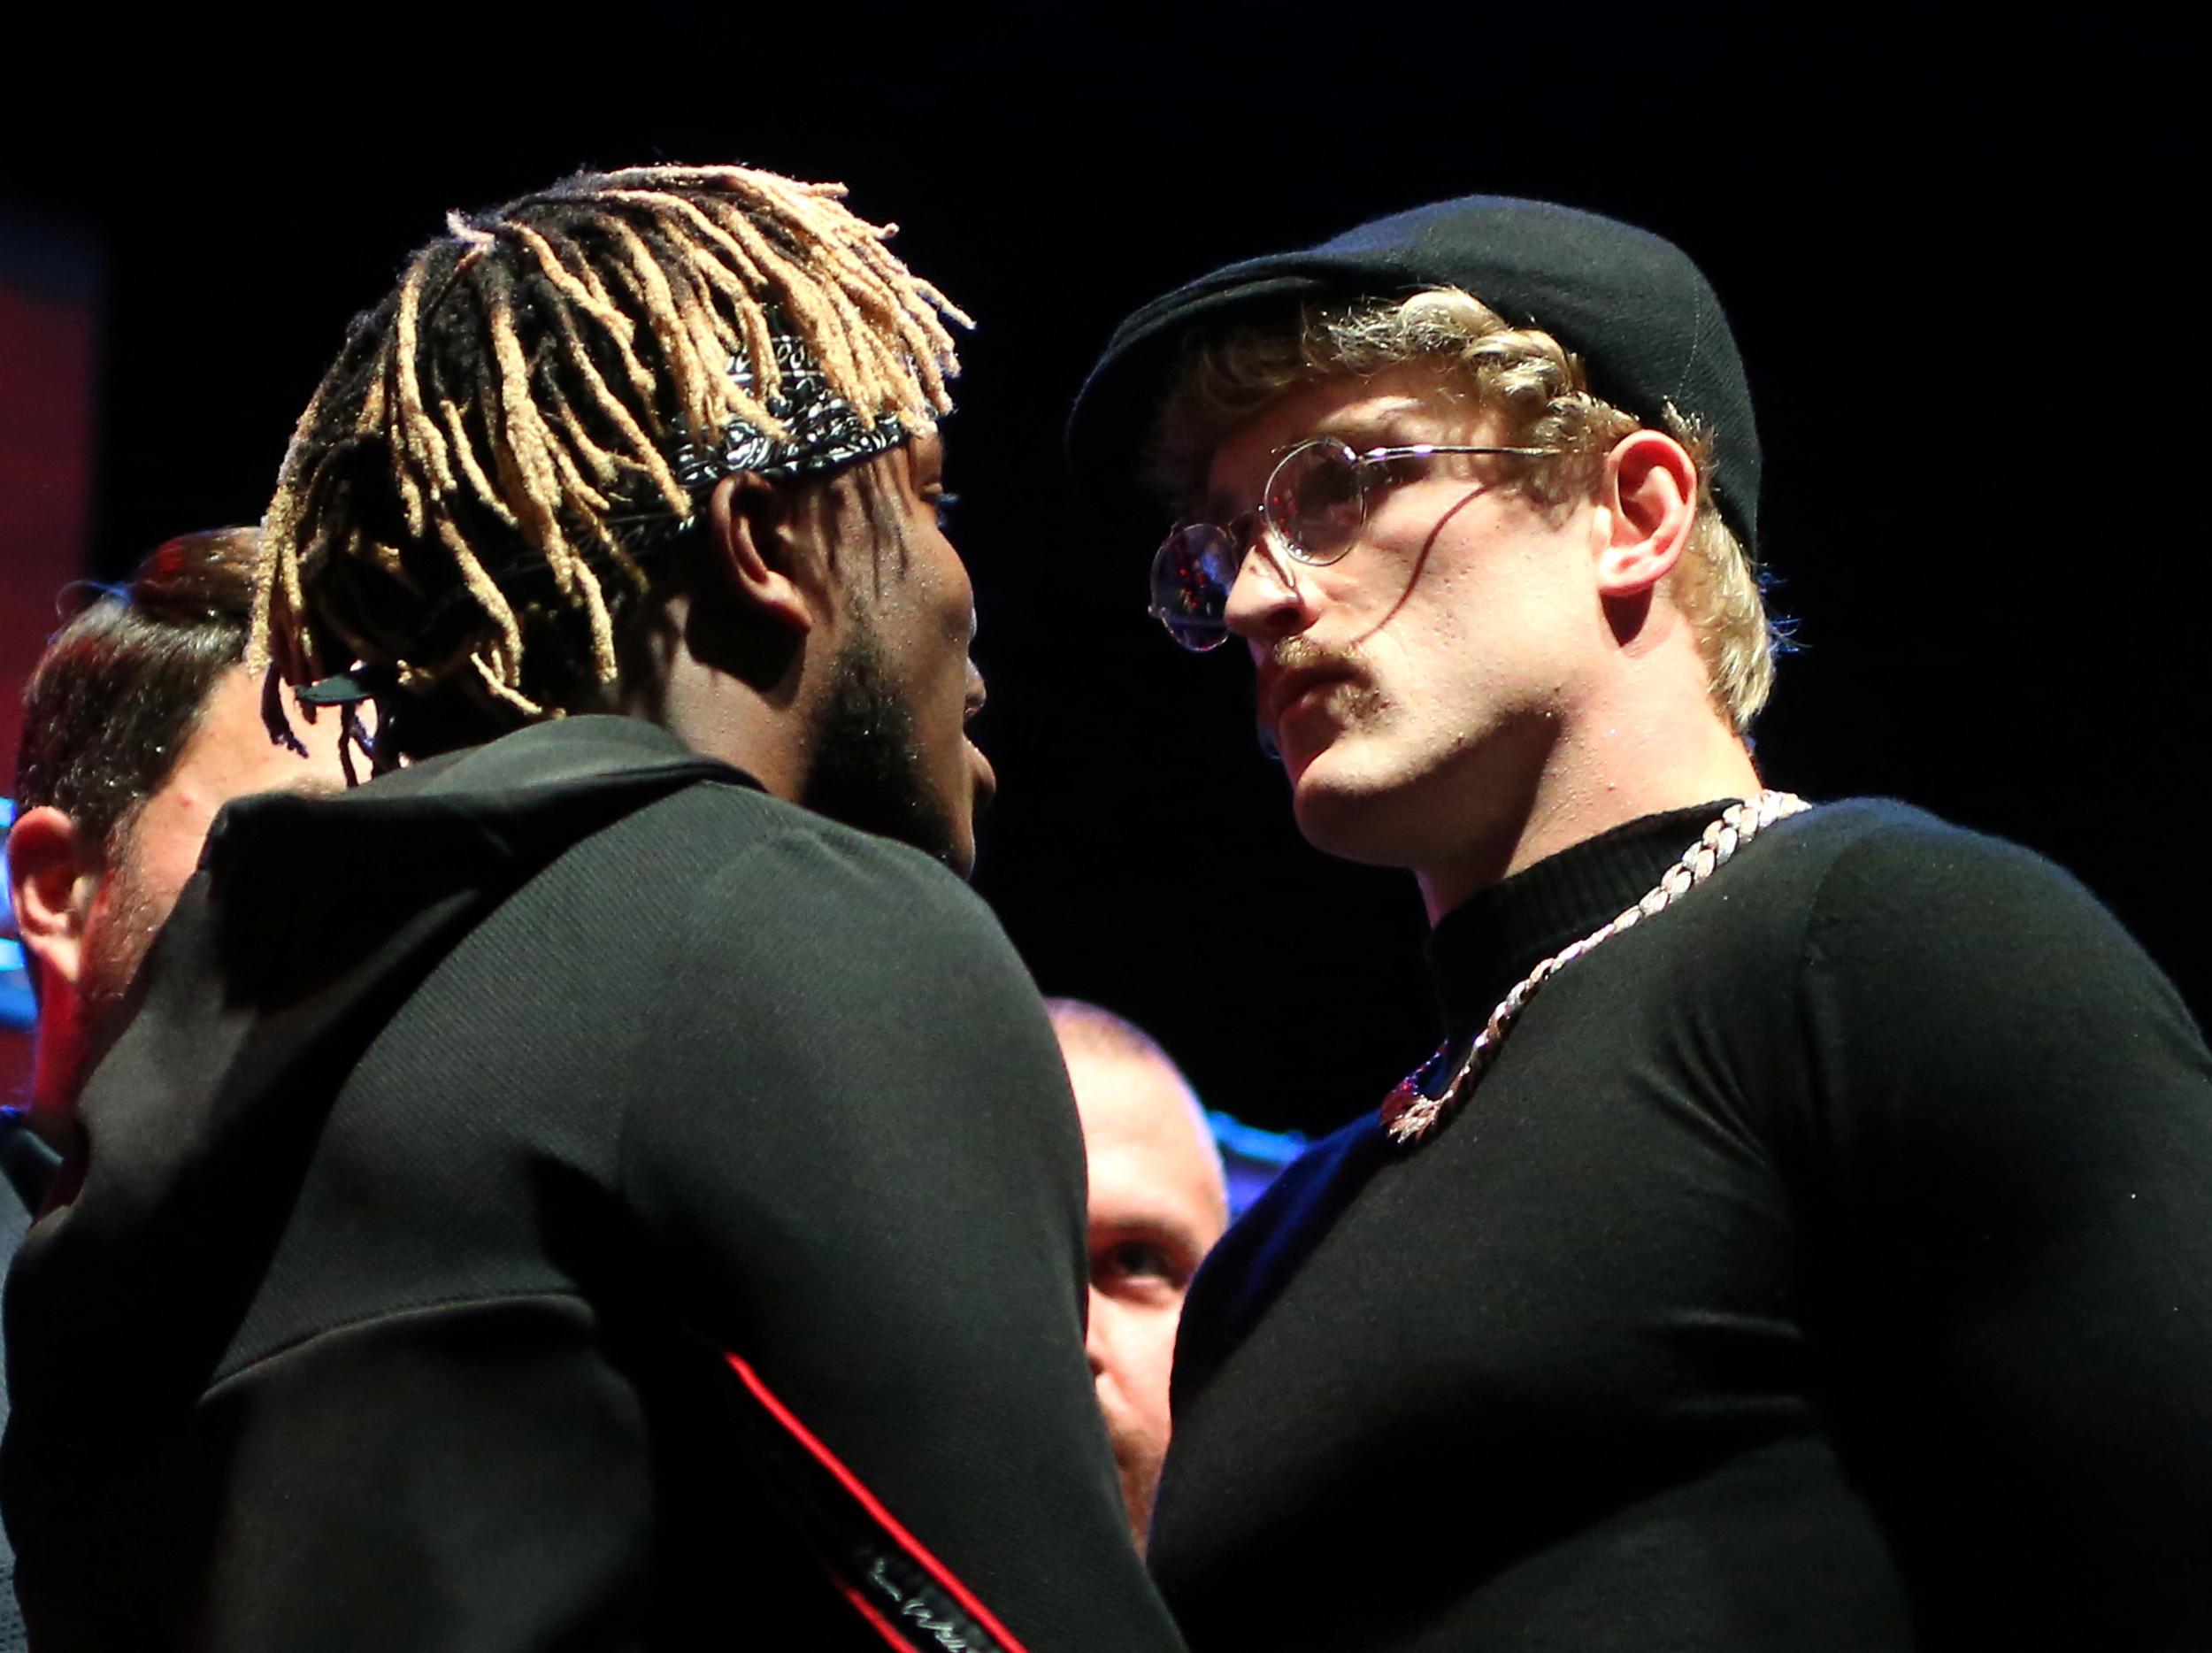 KSI vs Logan Paul fight stream: Can you watch rematch on YouTube and how much does it cost?